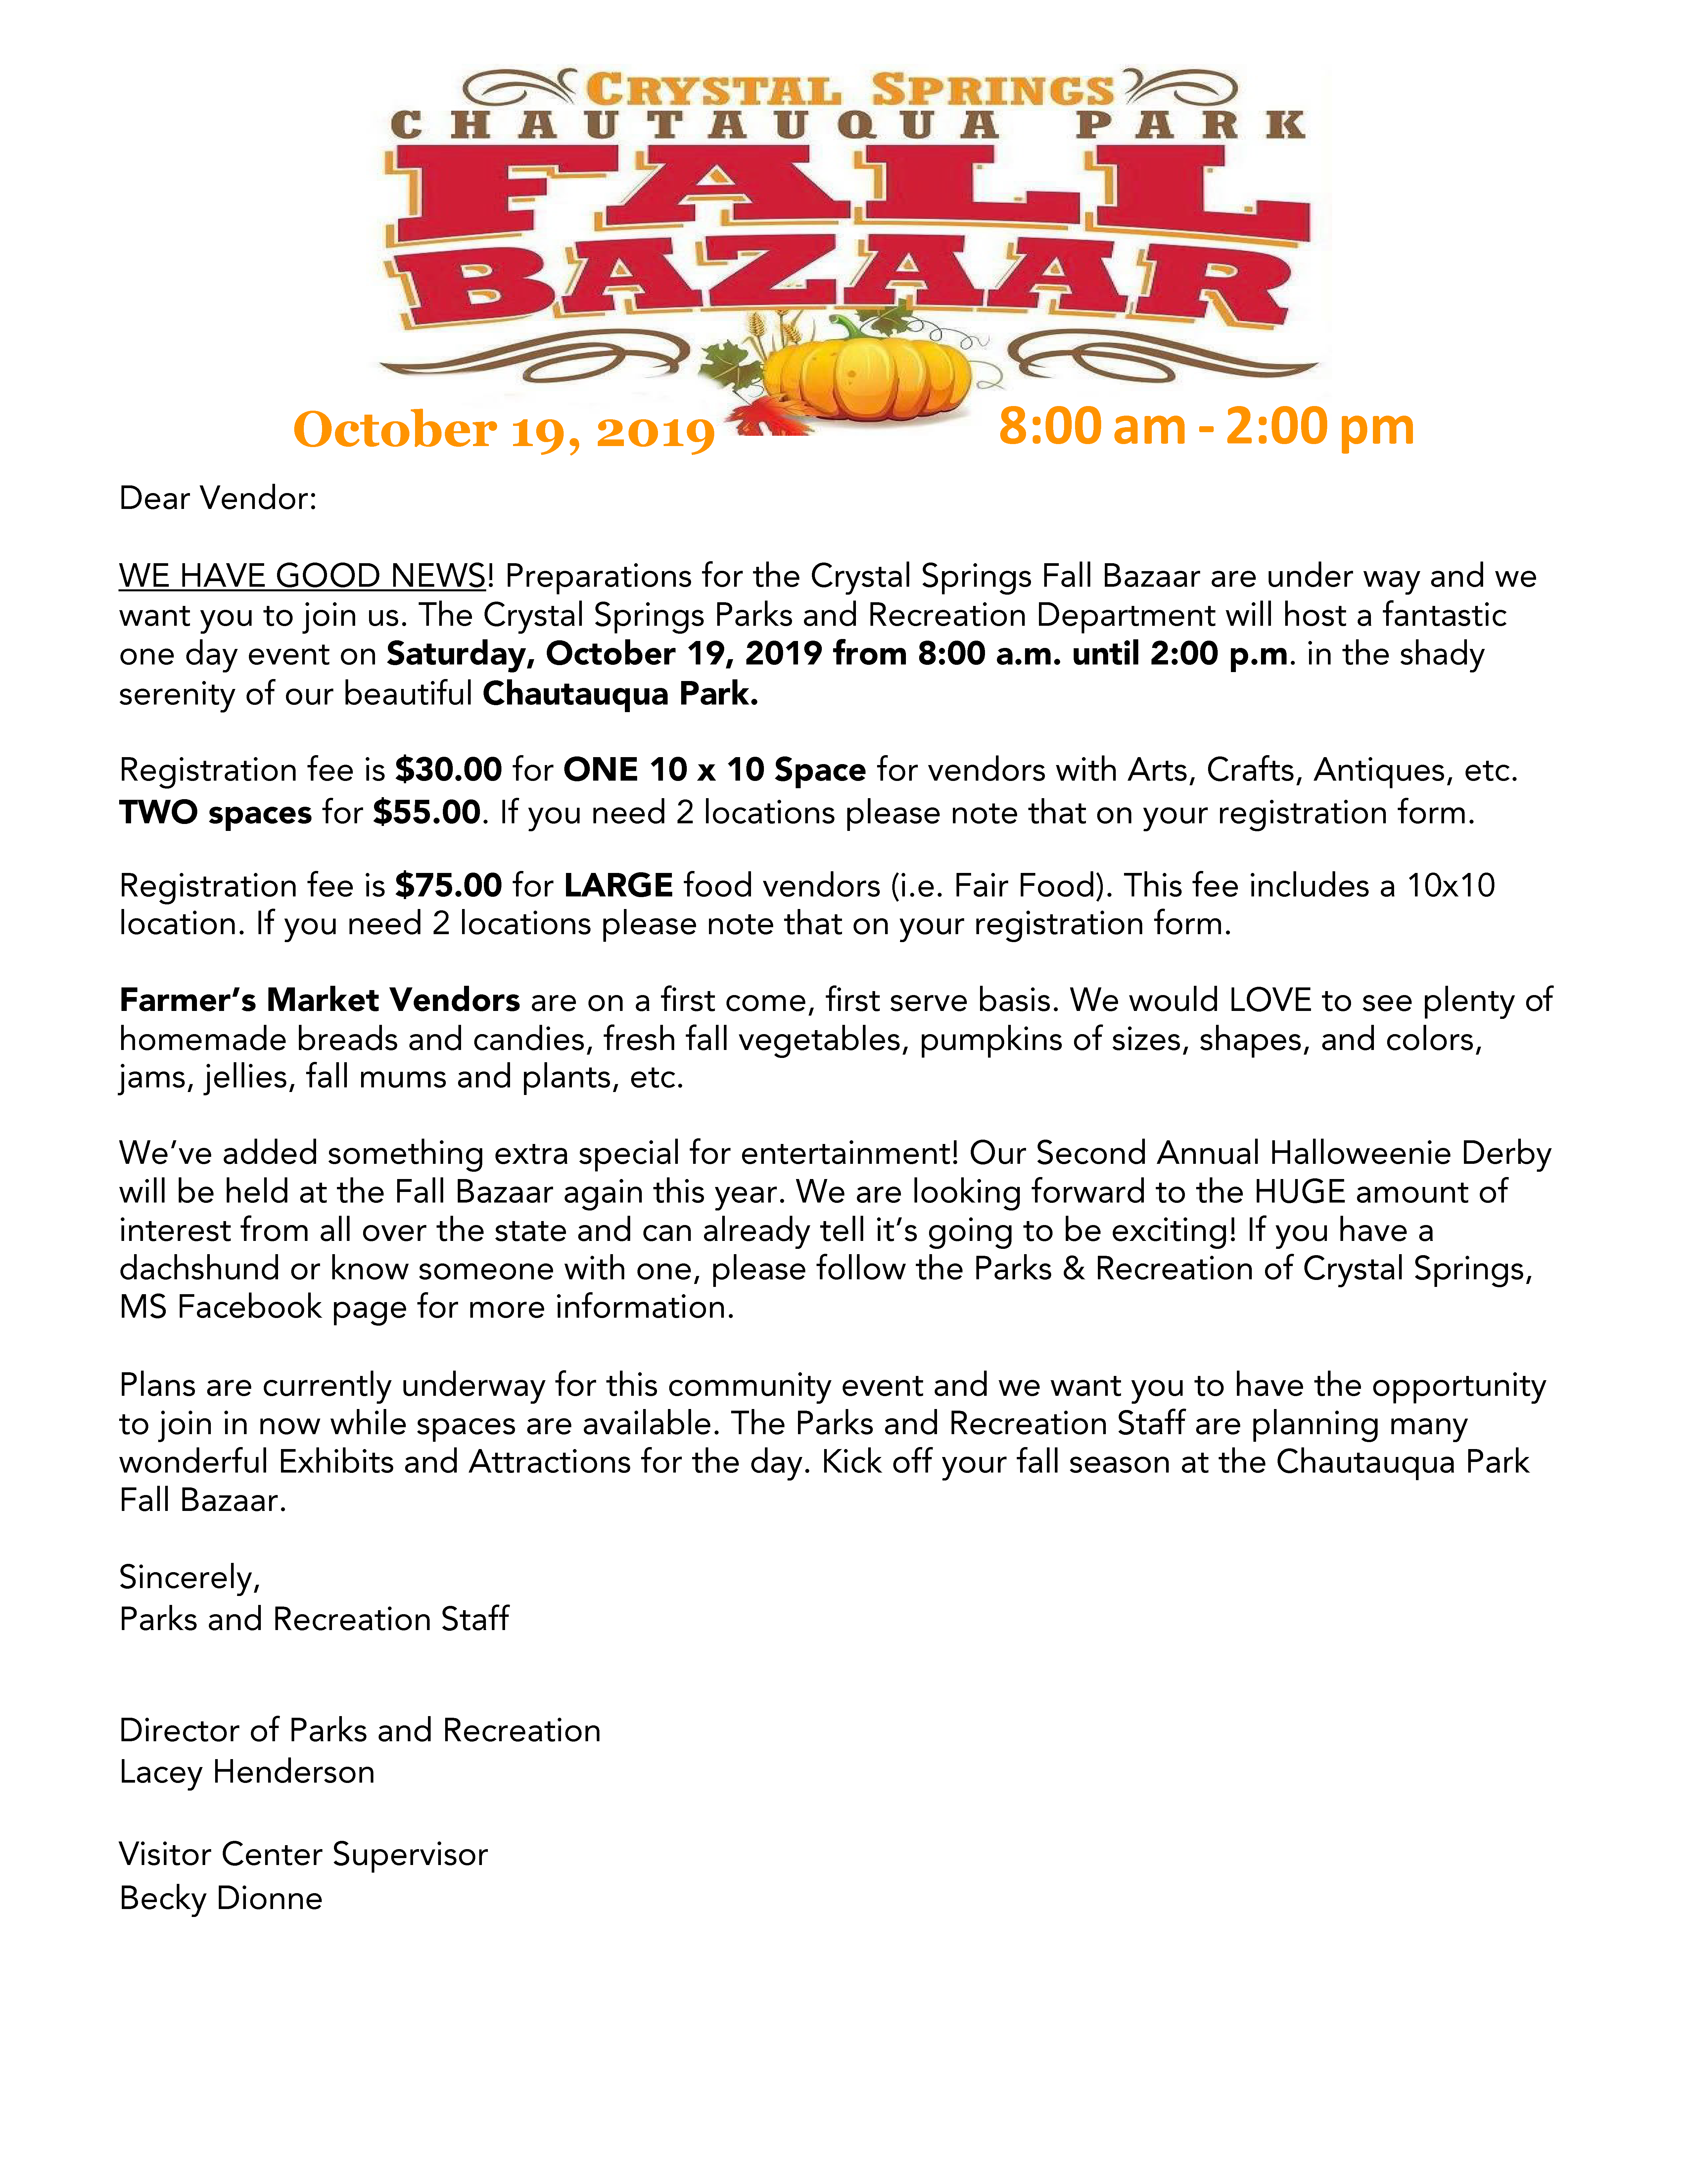 2019 Crystal Springs Fall Bazaar Interest Letter_Page_1